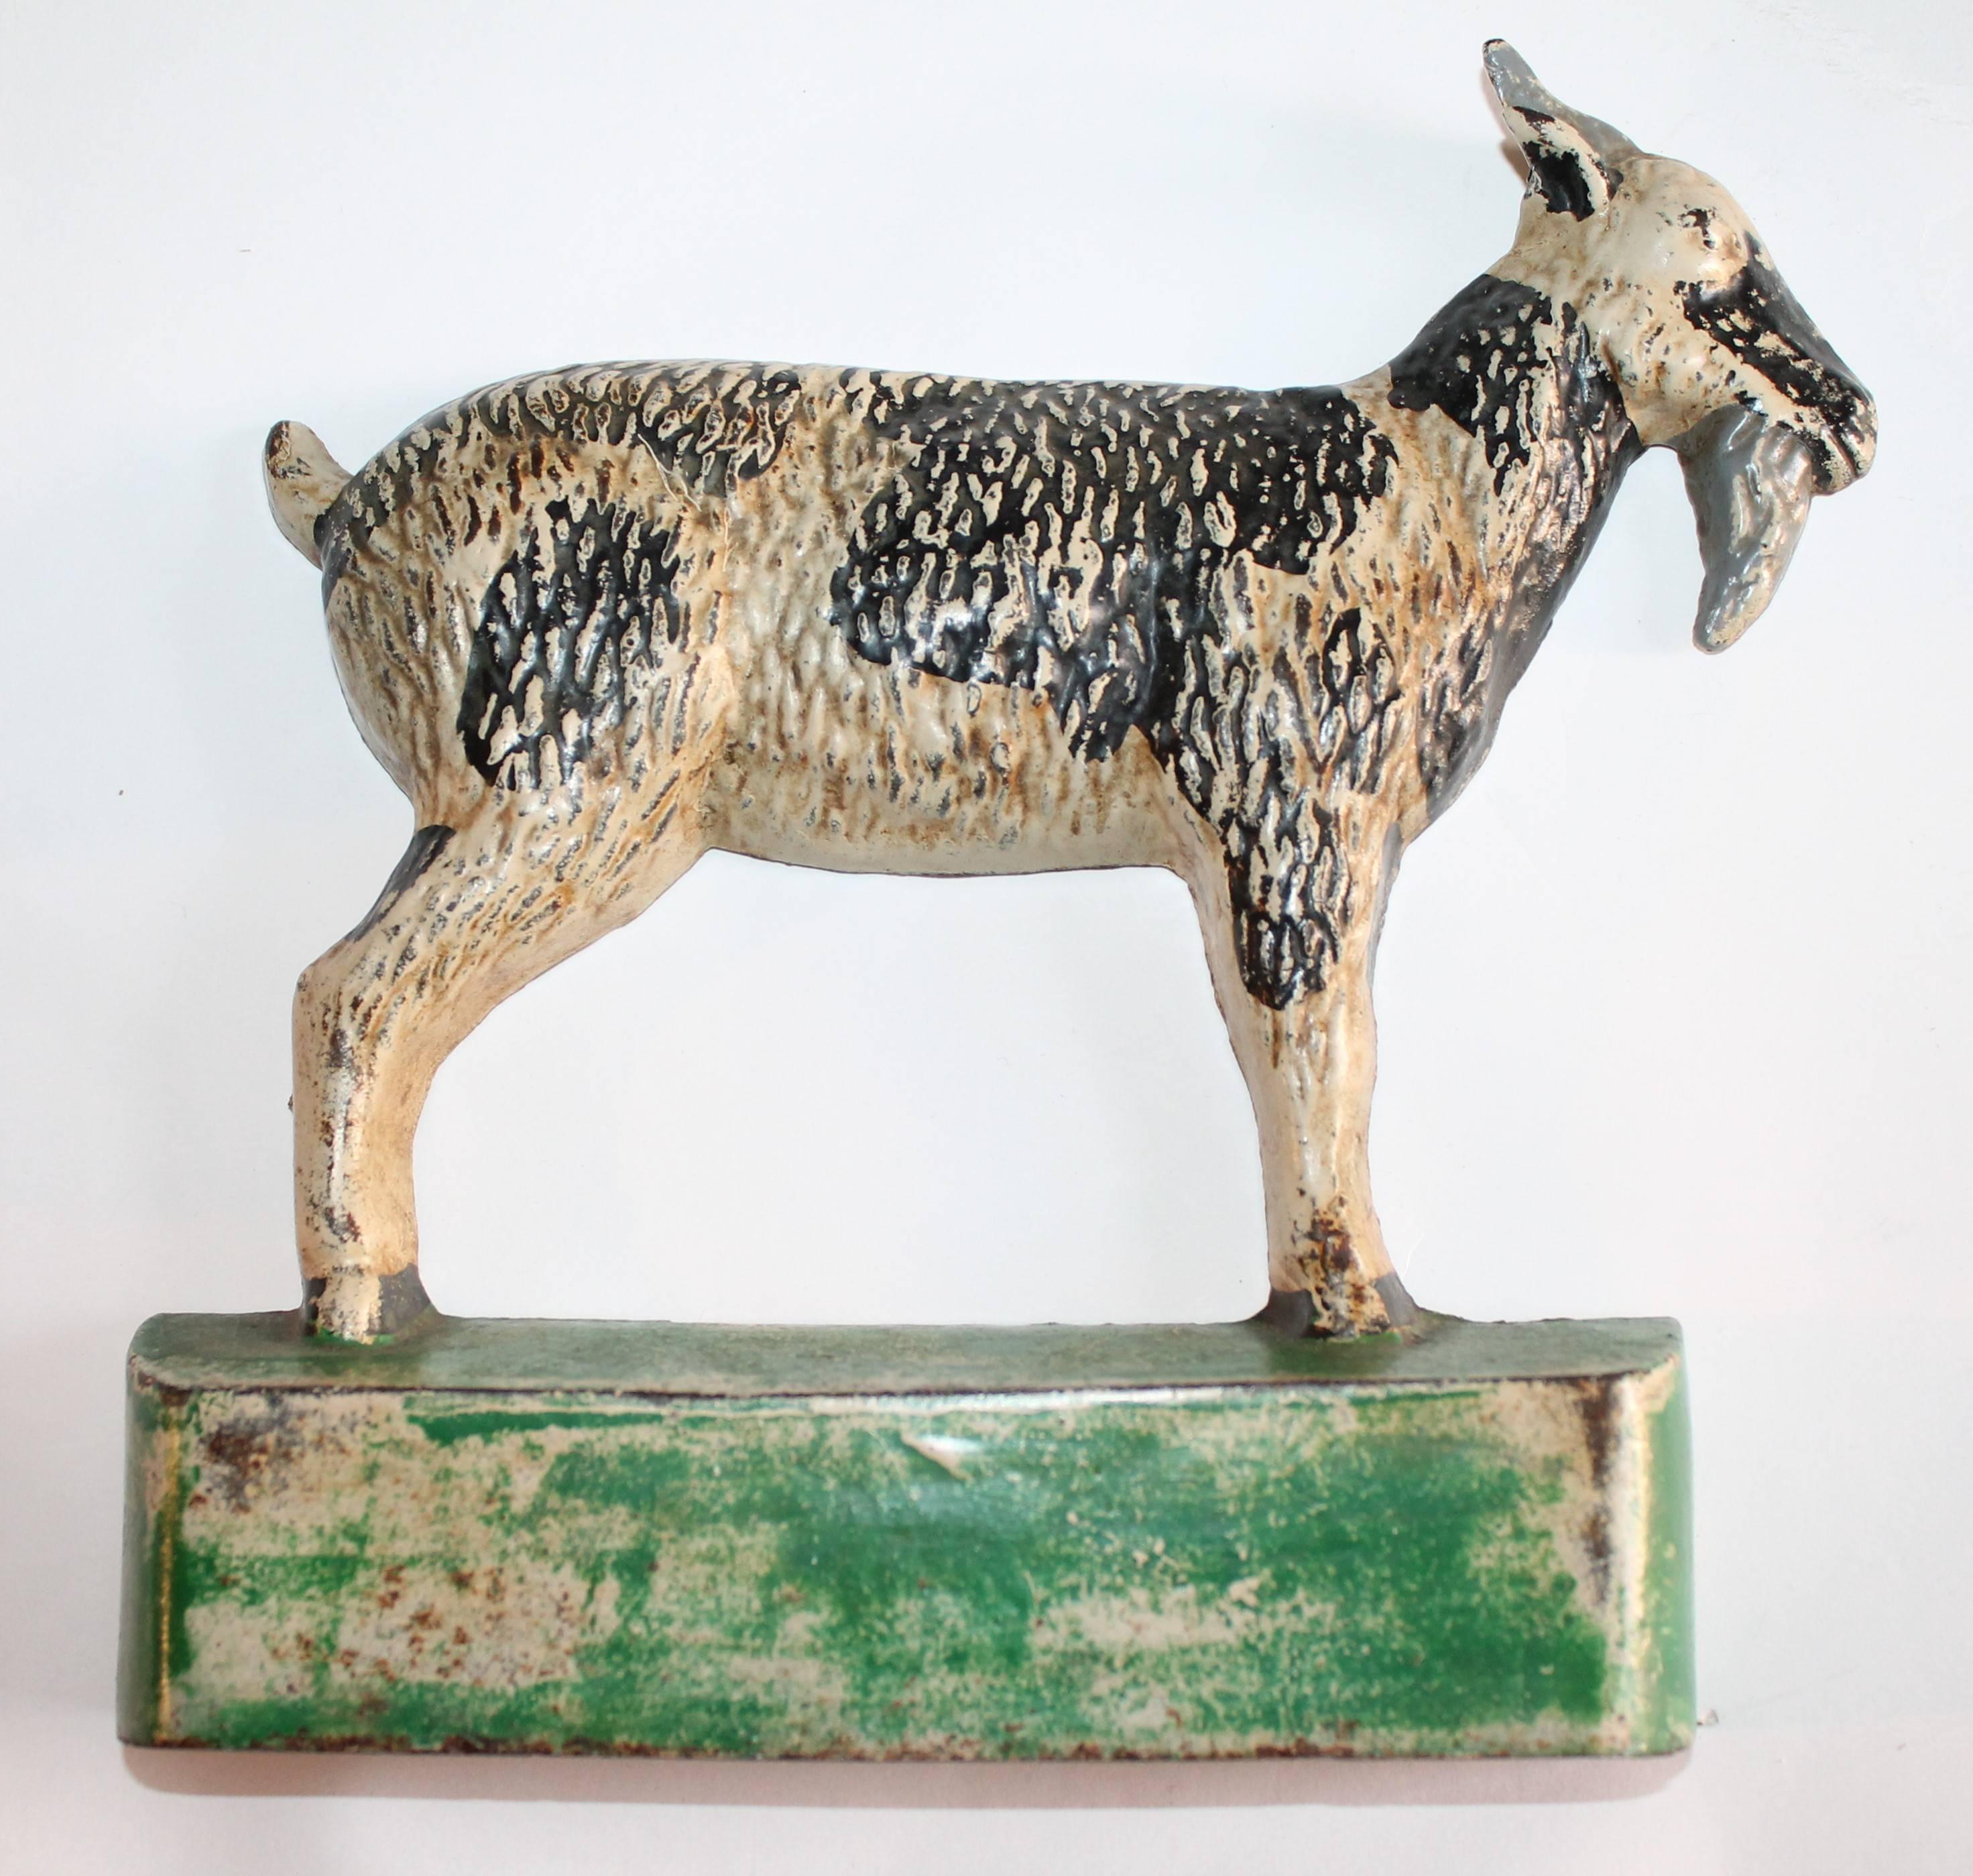 This early 20th century original painted cast iron goat is in good condition with wear consistent from age and use.